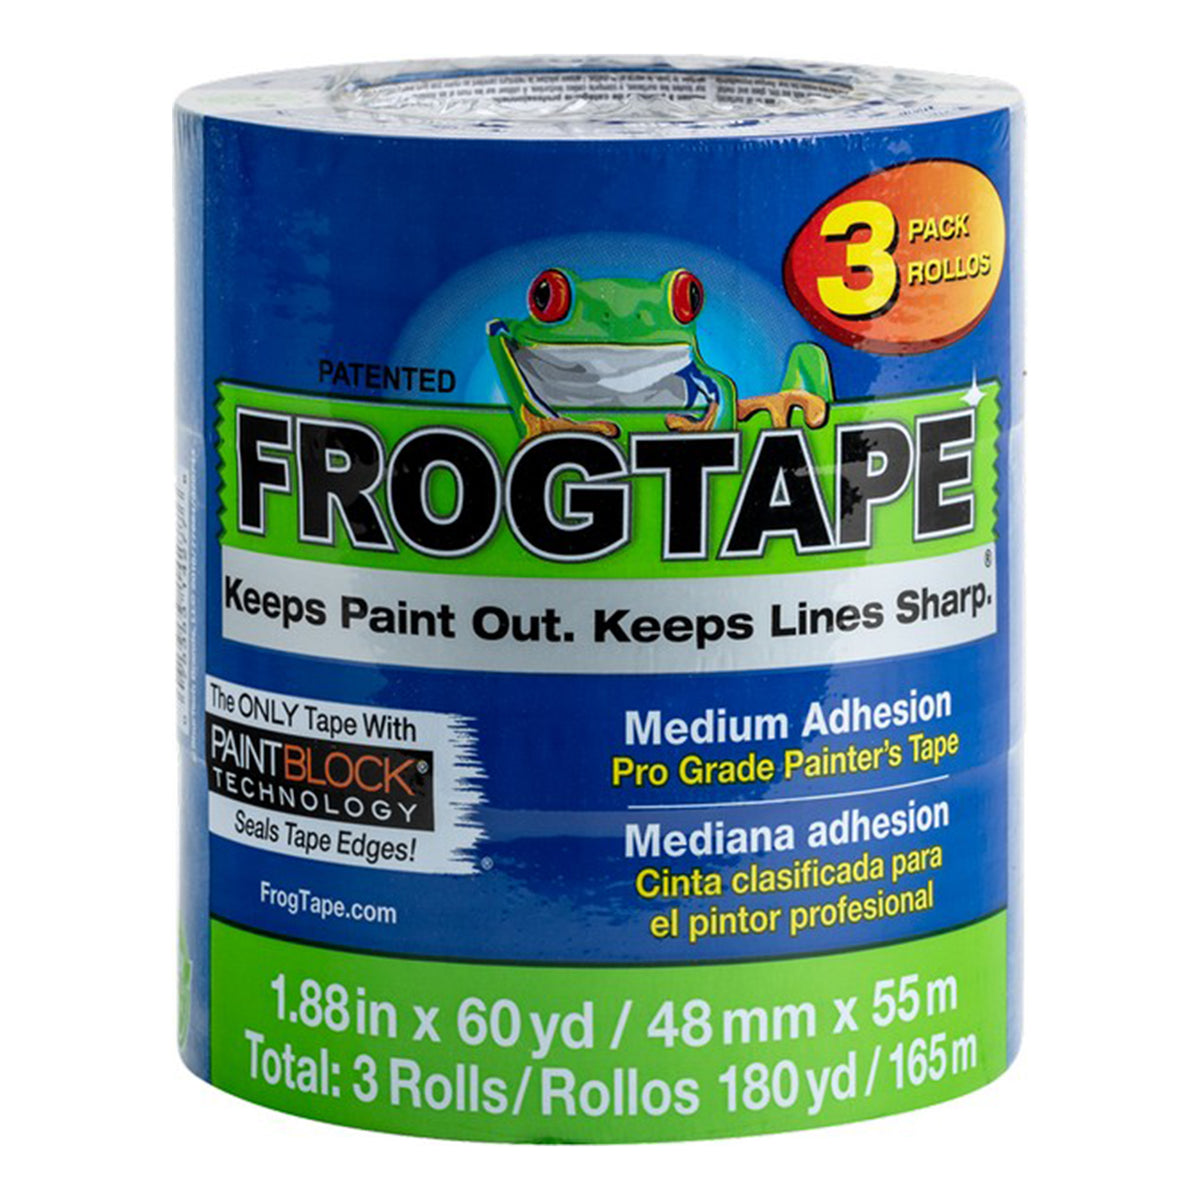 Pros and Cons of Painters Tape